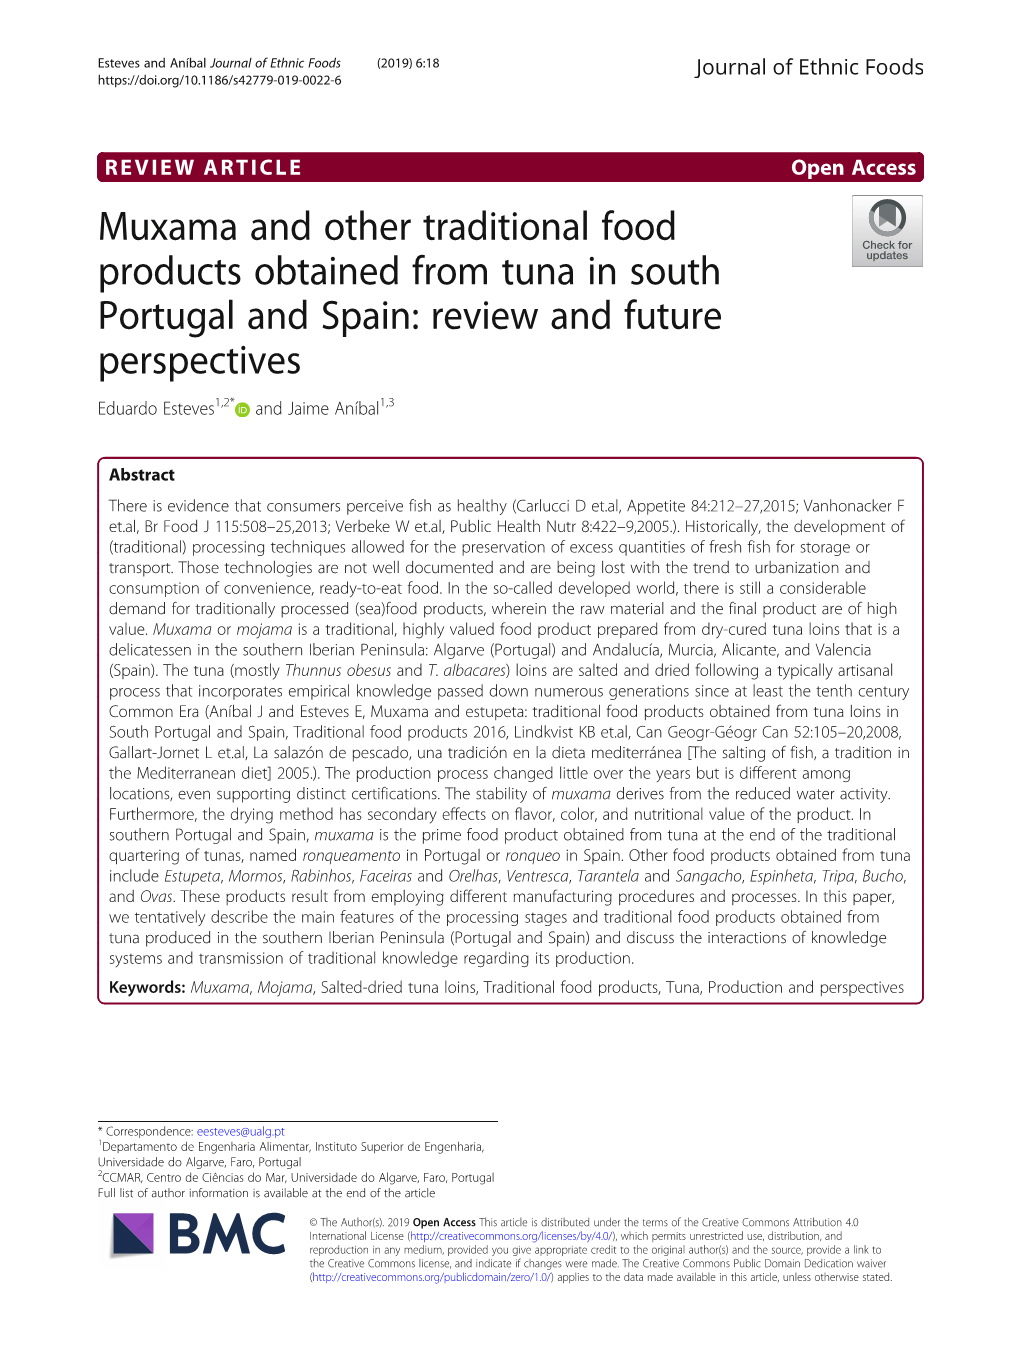 Muxama and Other Traditional Food Products Obtained from Tuna in South Portugal and Spain: Review and Future Perspectives Eduardo Esteves1,2* and Jaime Aníbal1,3